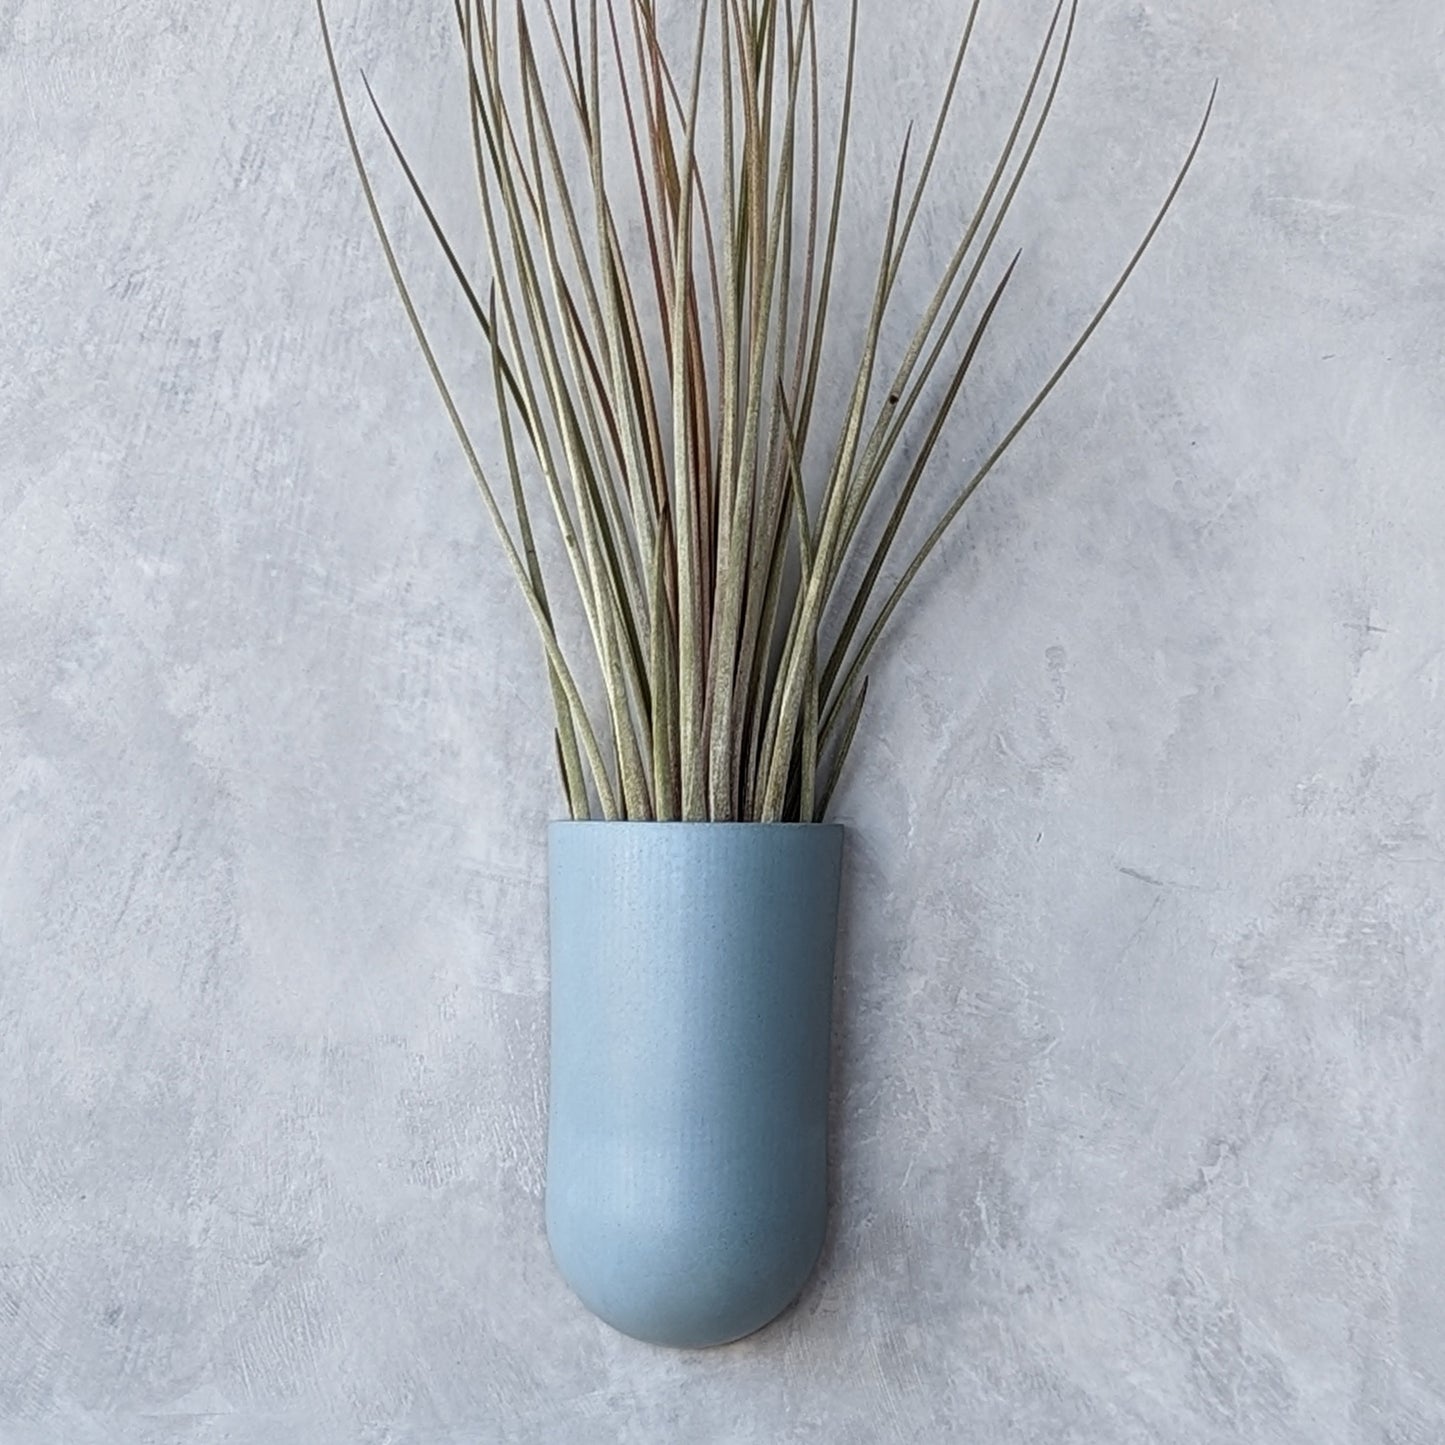 Concrete Wall-Mounted Air Plant Holder